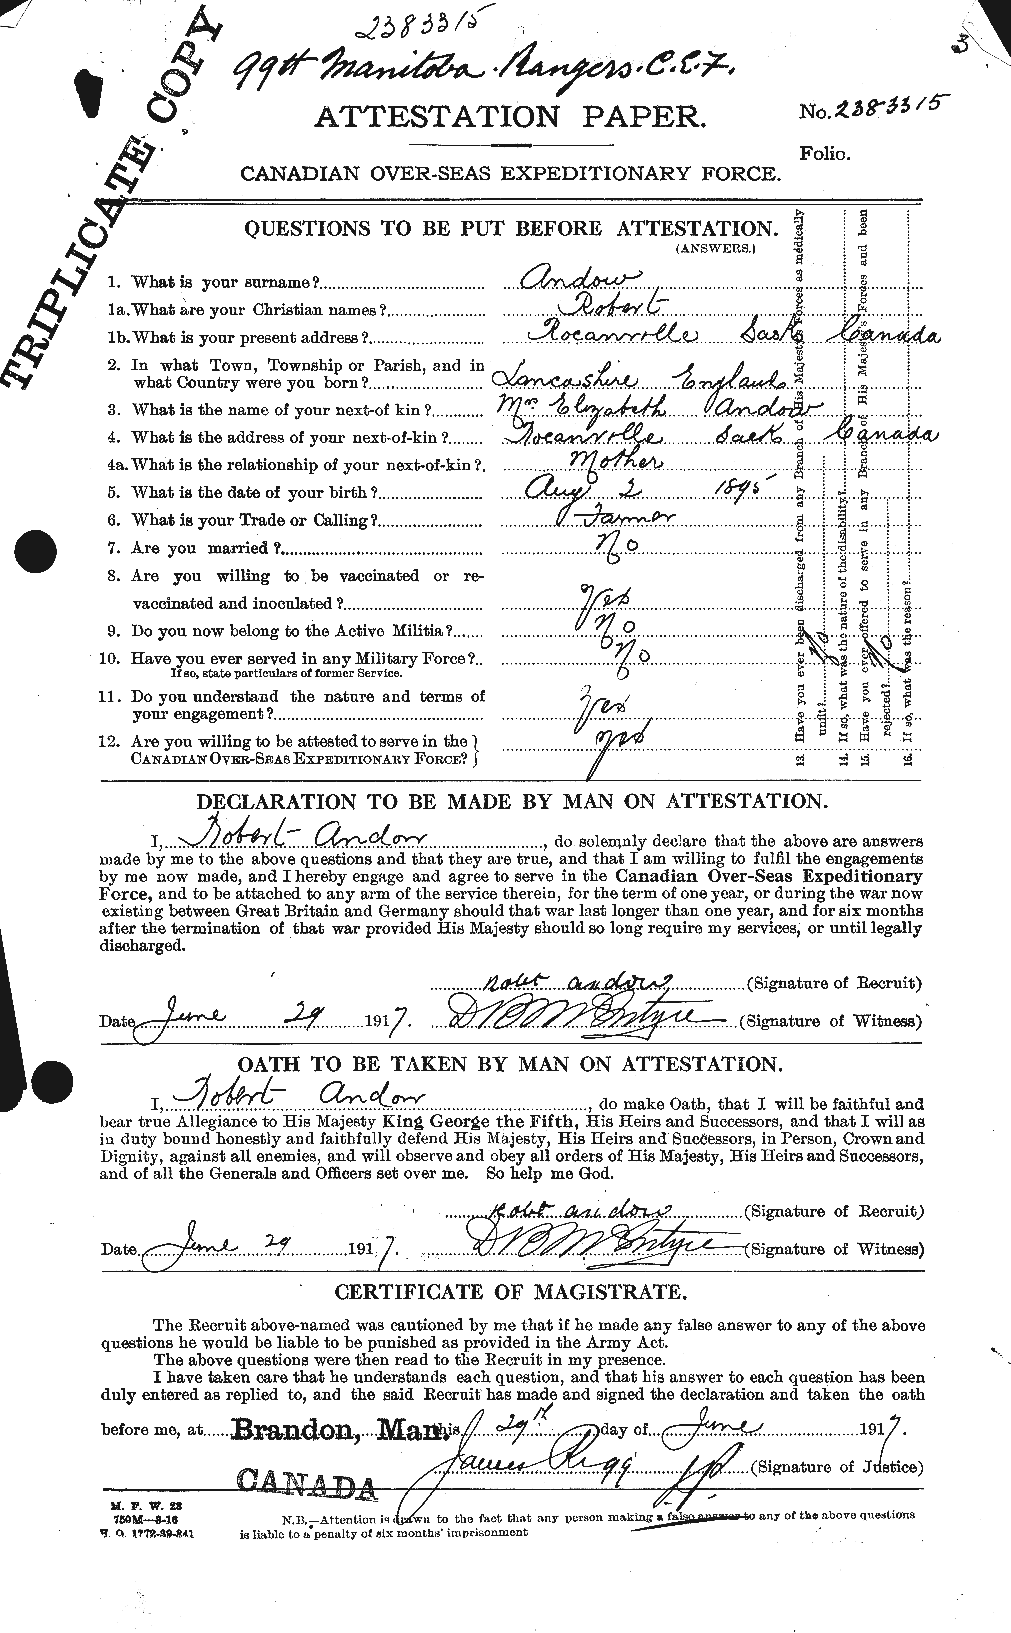 Personnel Records of the First World War - CEF 210631a